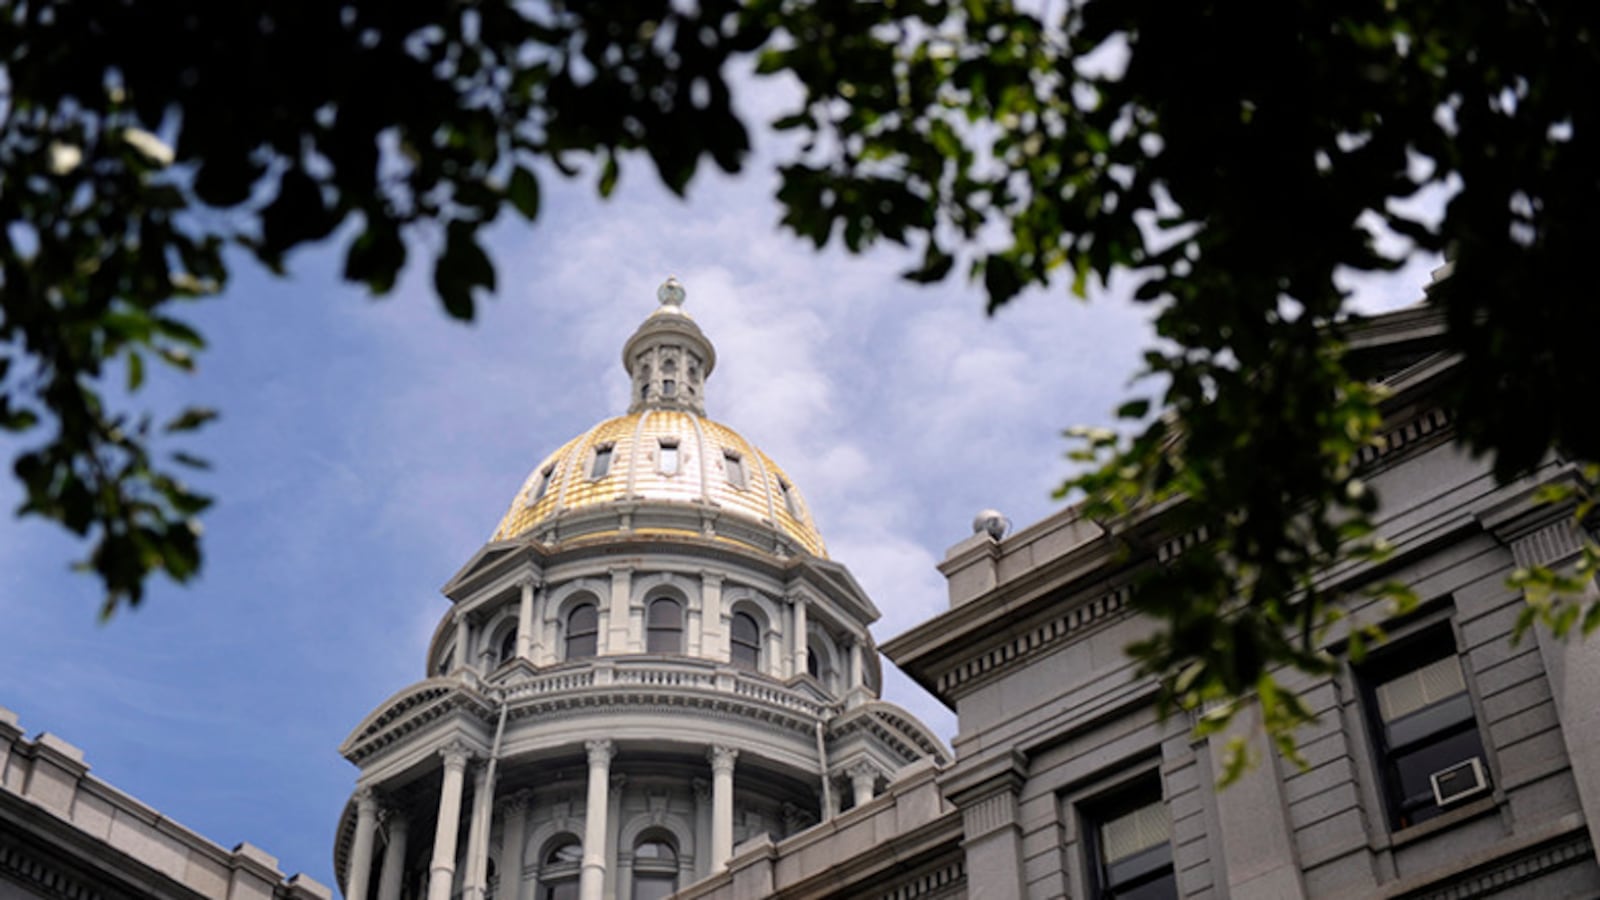 More money is forecast to appear below the gold dome (Denver Post photo).